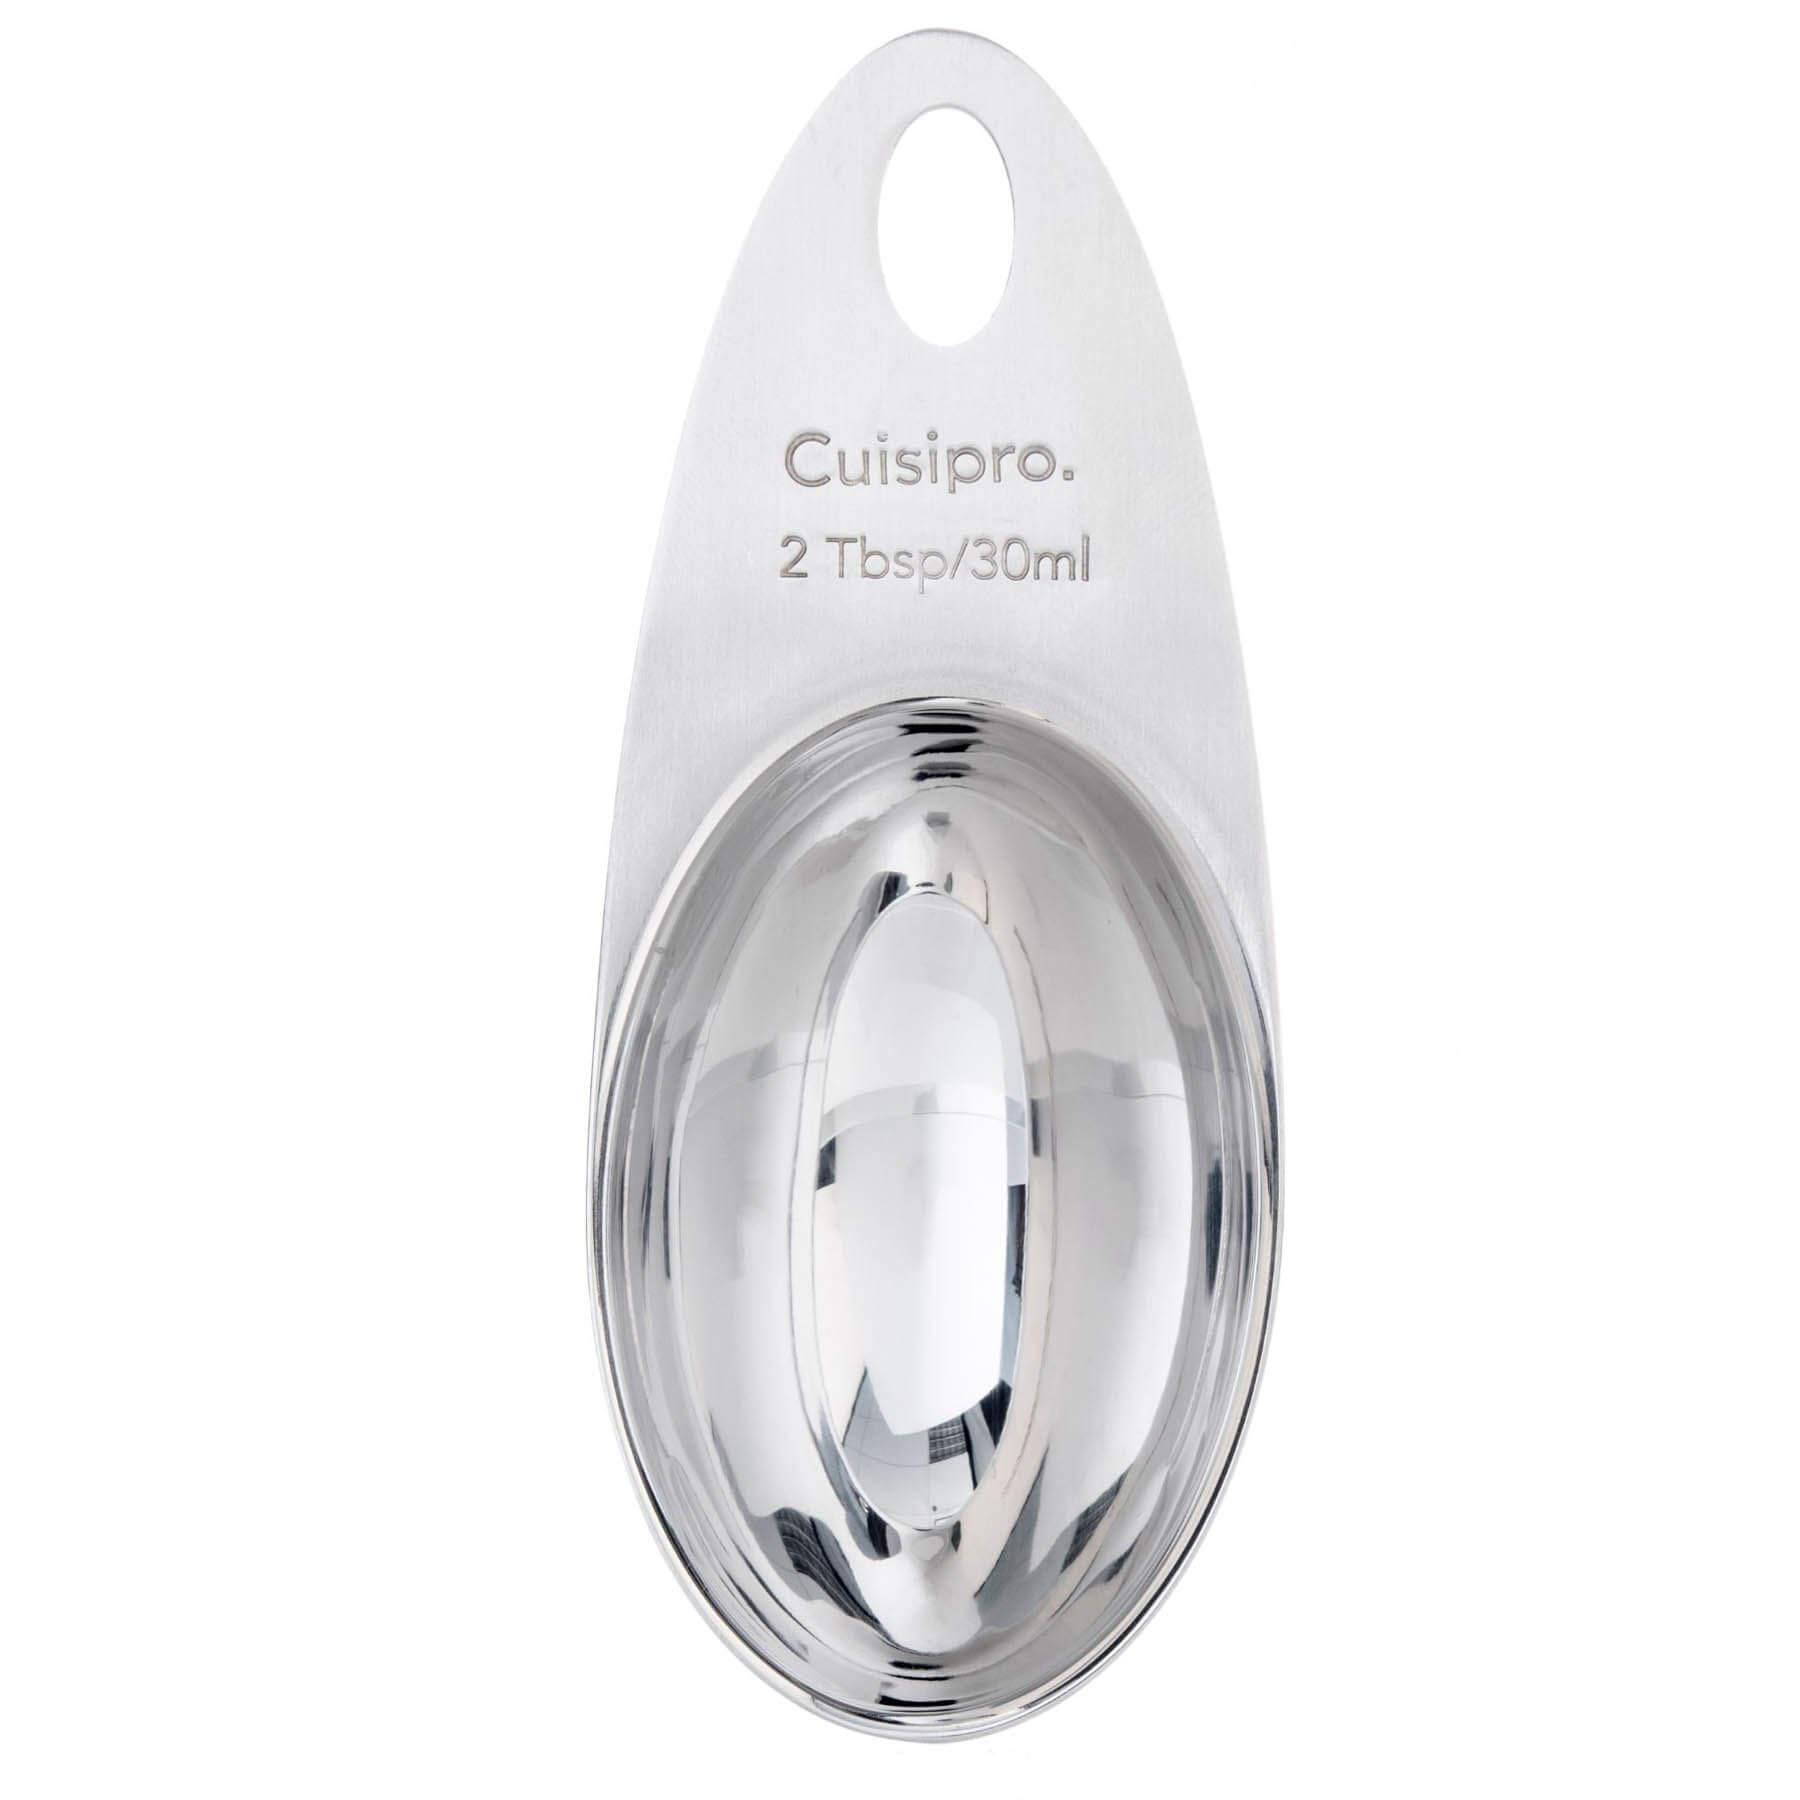 Cuisipro Short Coffee Spoon S/S 10cm